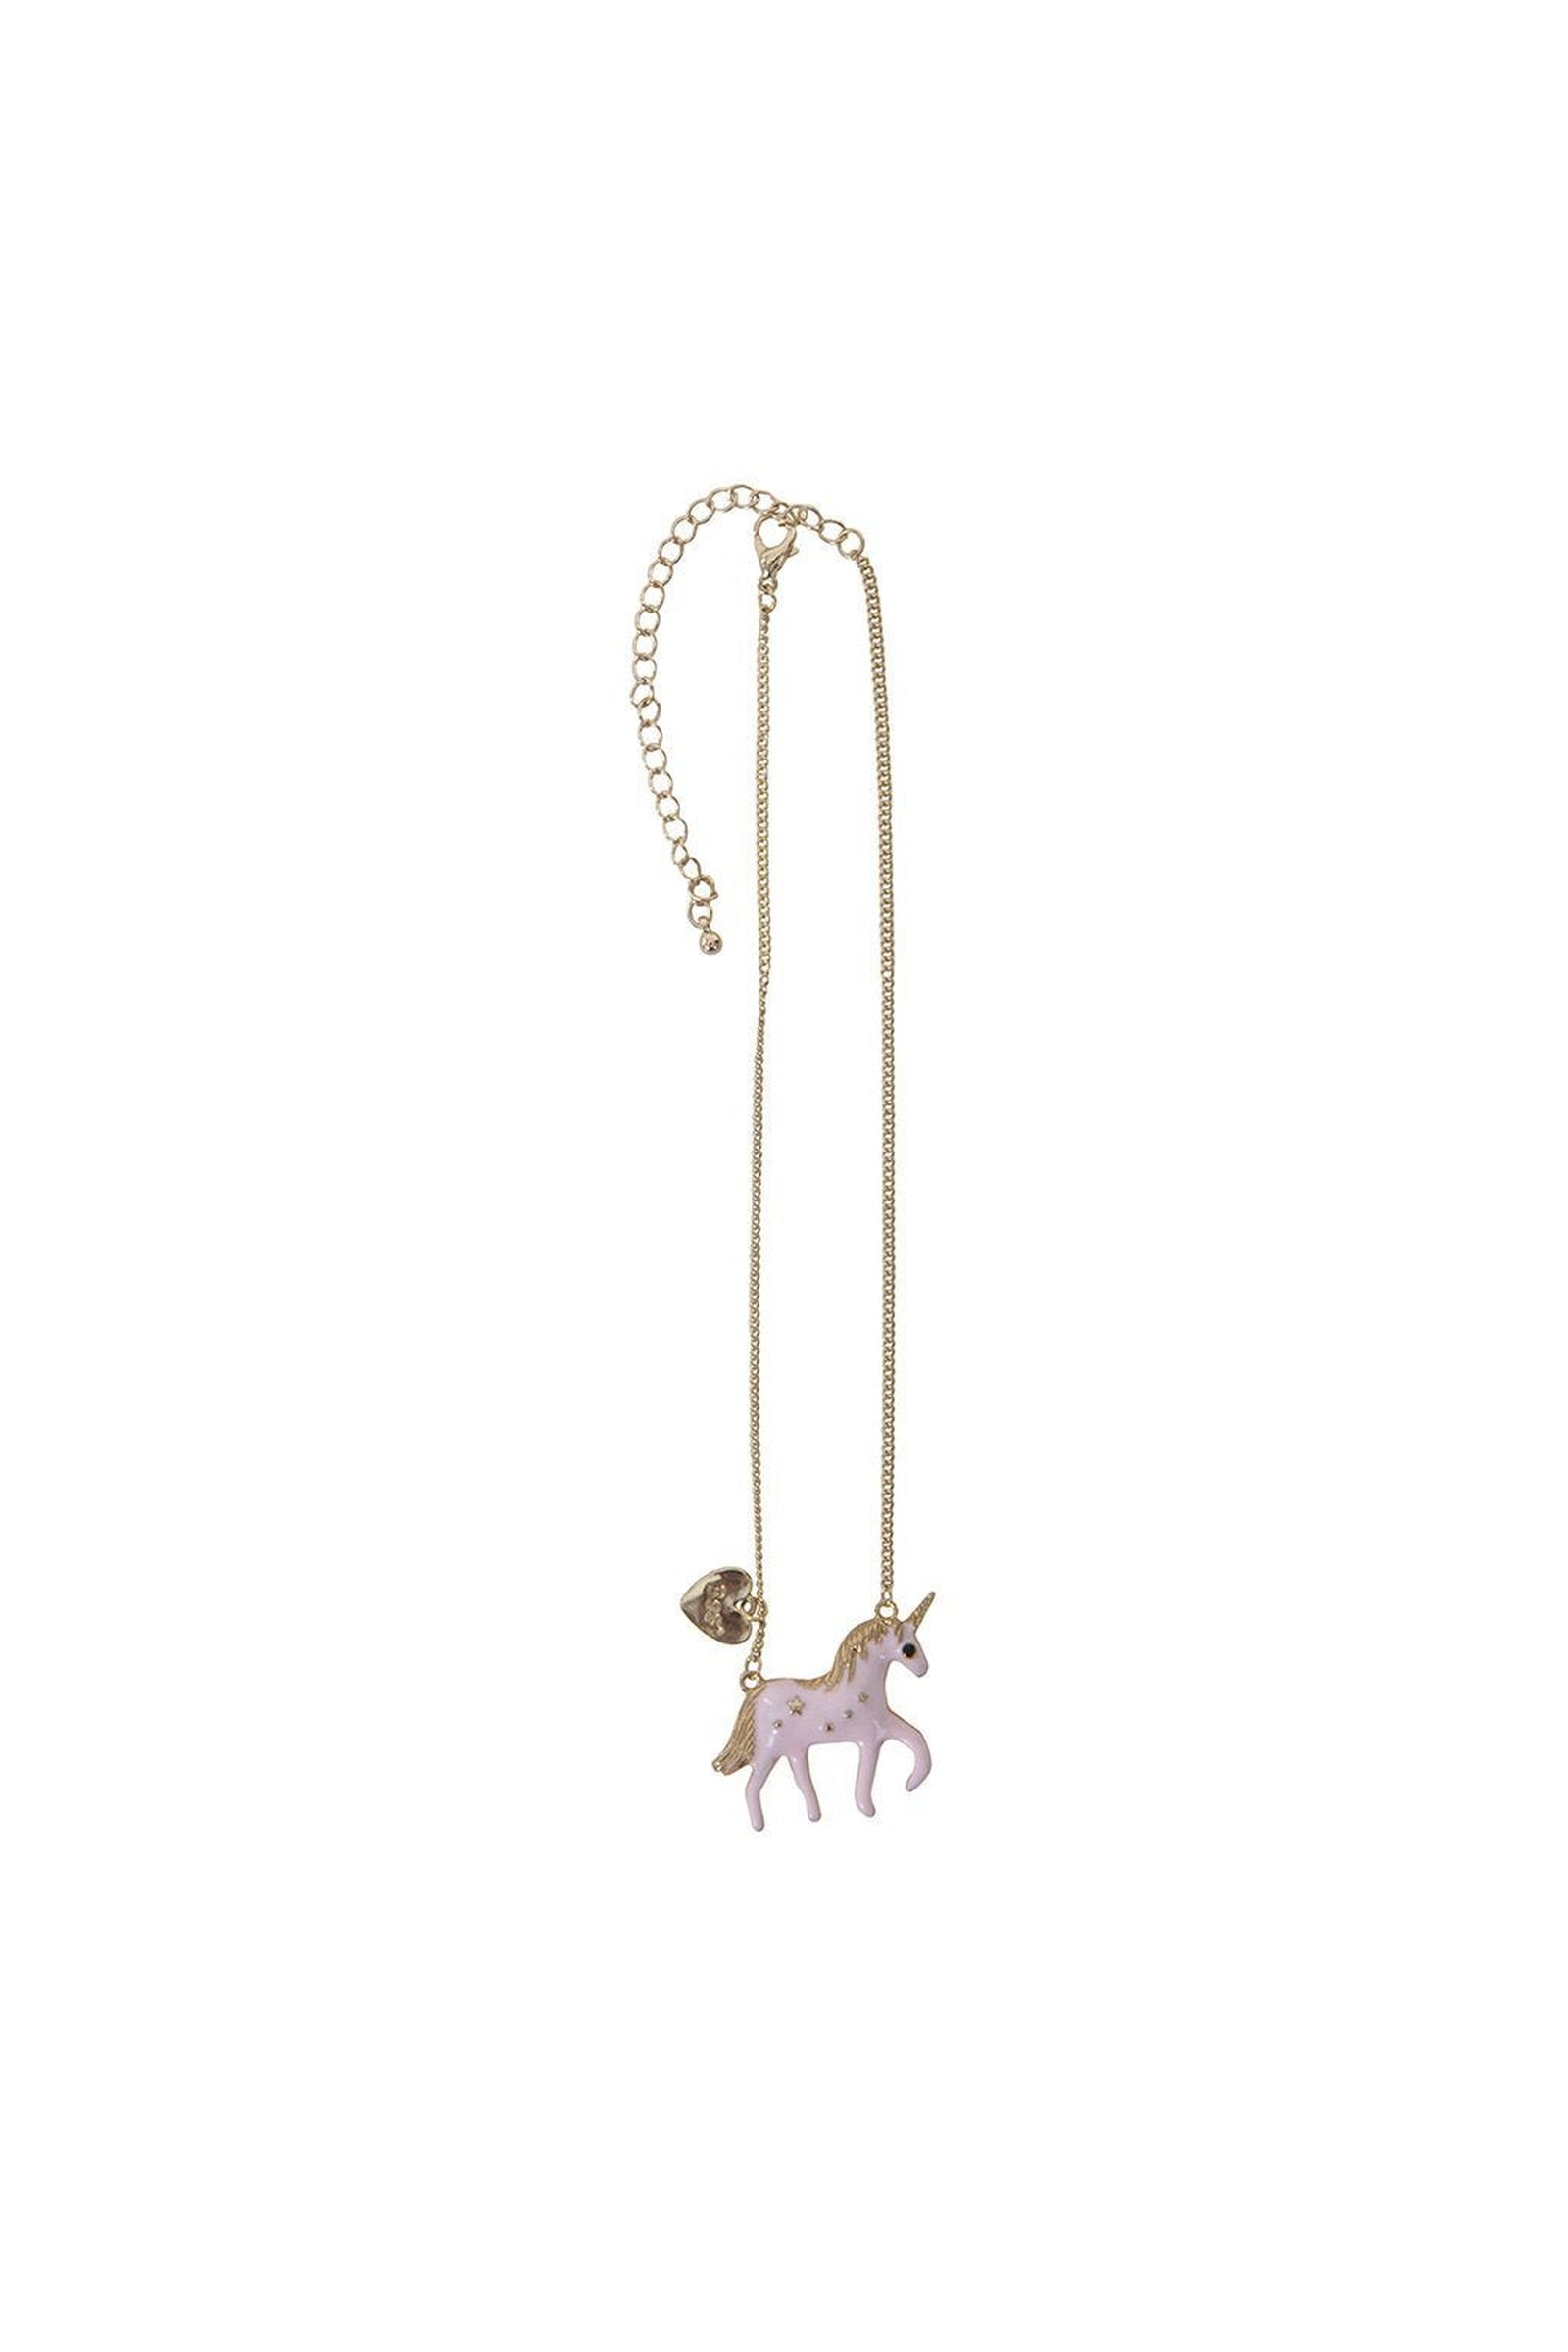 Unicorn Necklace by Great Pretenders #86093